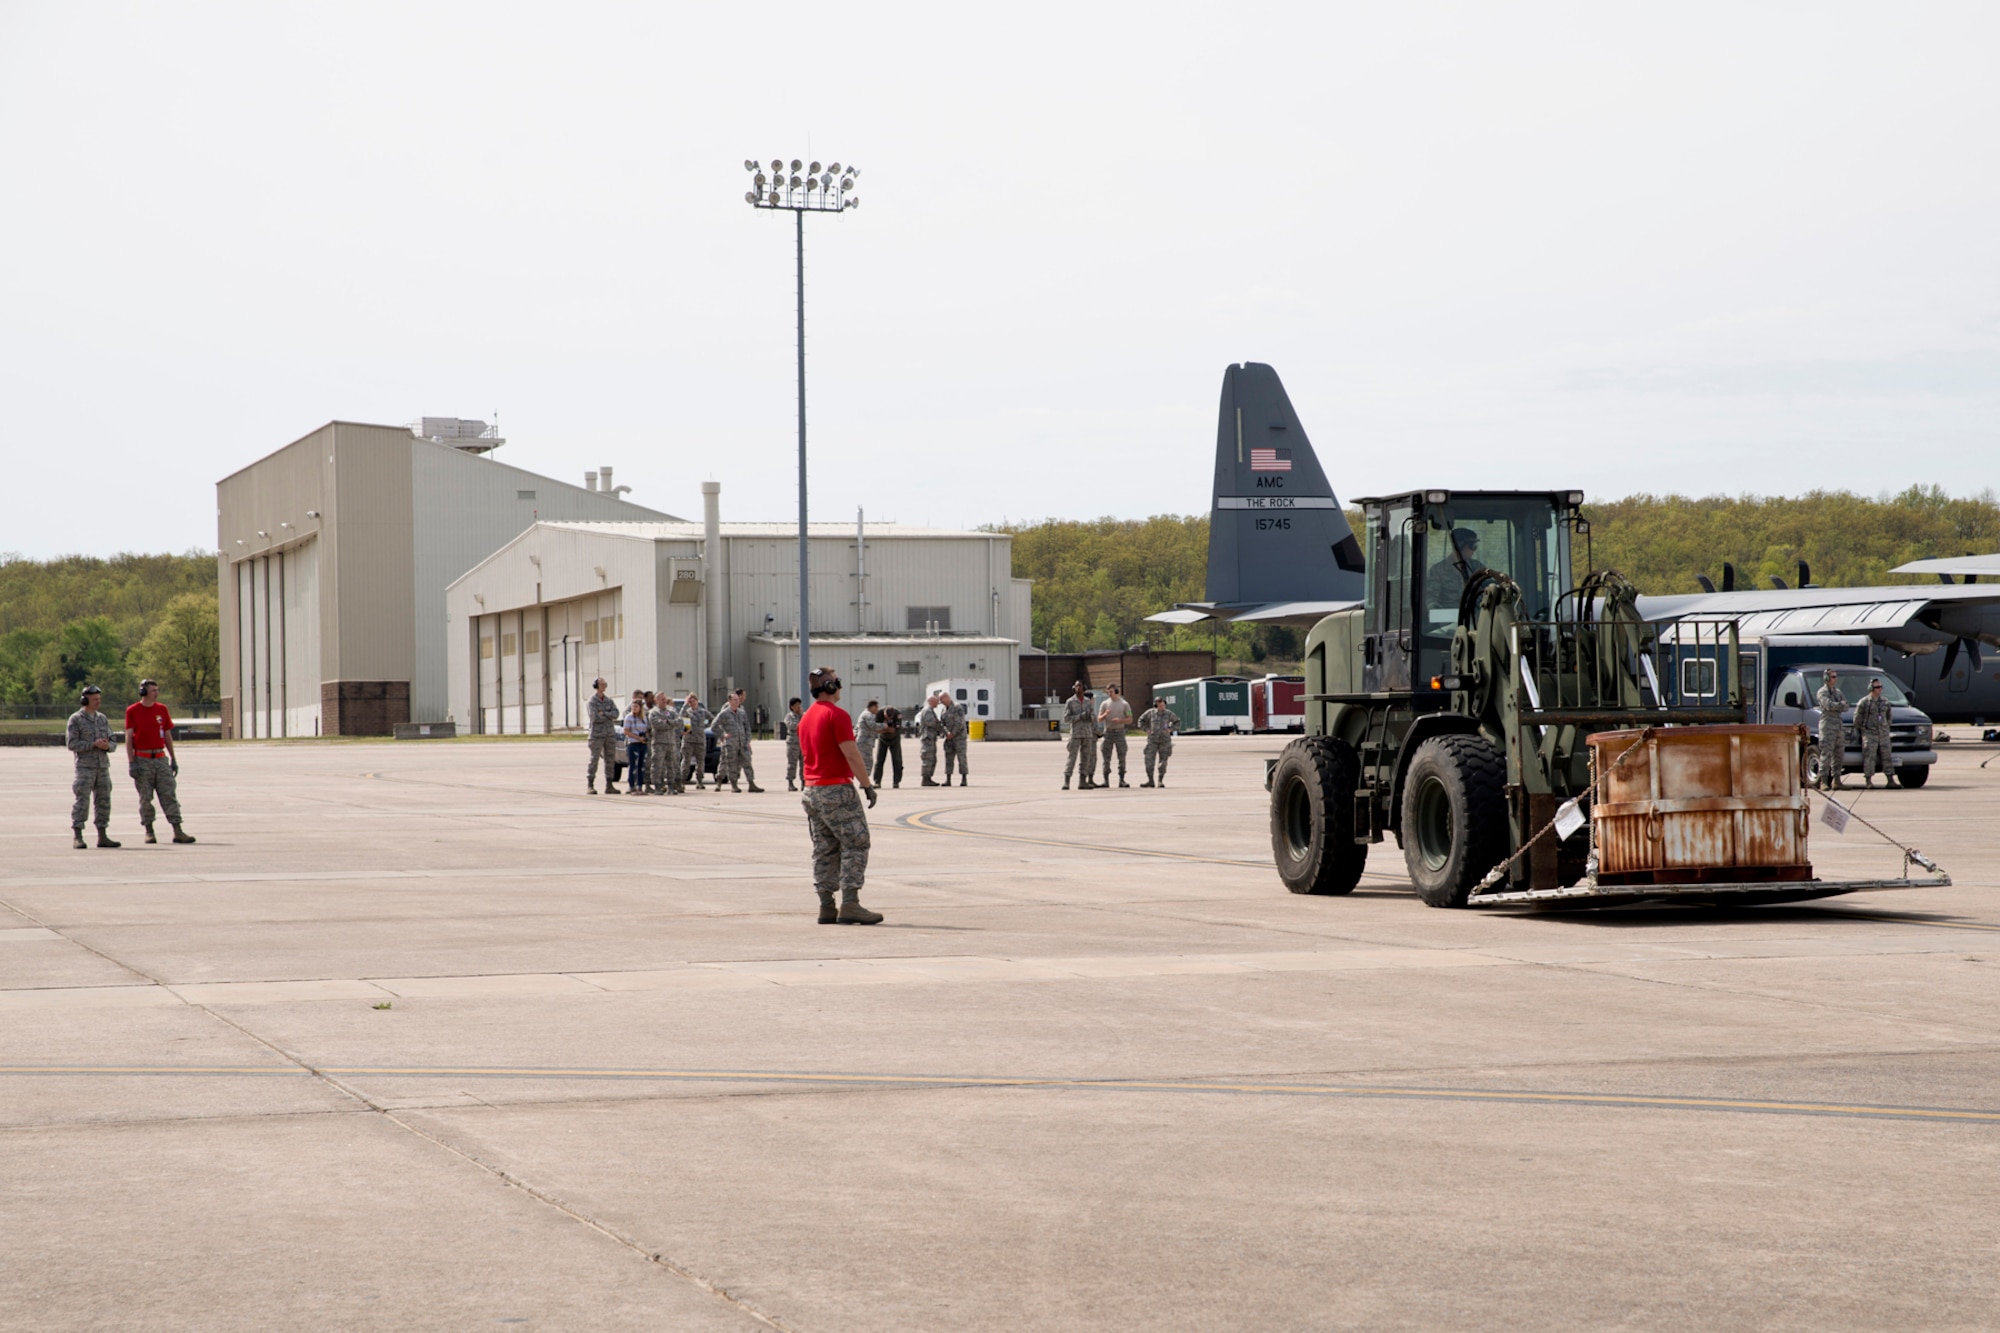 U.S. Air Force Reserve Airmen from the 913th Airlift Group gather on the ramp to support a team of Airmen assigned to 96th Aerial Port Squadron as they practice loading and unloading a C-130J Super Hercules during the Unit Training Assembly (UTA) weekend April 2, 2017, at Little Rock Air Force Base, Ark. The team will be competing in this year’s Port Dawg Challenge at Dobbins Air Reserve Base, Ga. (U.S. Air Force photo by Master Sgt. Jeff Walston/Released)